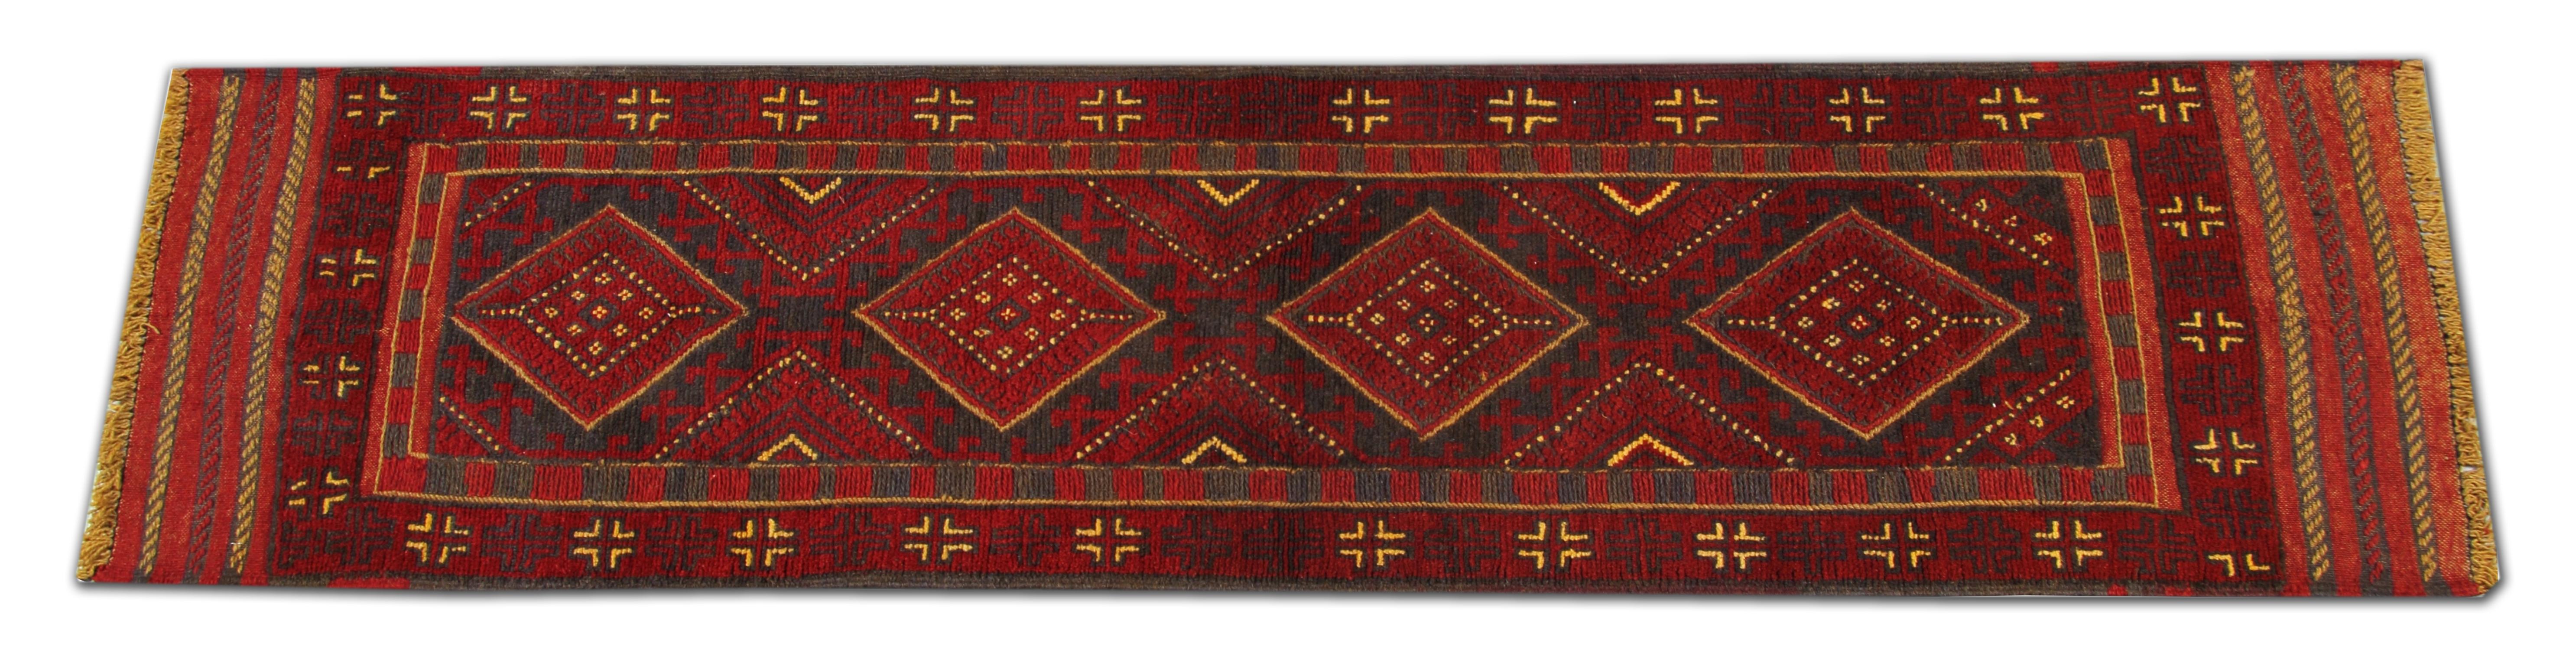 This impressive antique red rug is made from our master weavers in Afghanistan. These particular carpet runners are made with all-natural vegetable dyes. The patterned rugs display an all-over geometrical rug pattern. This woven rug also has an